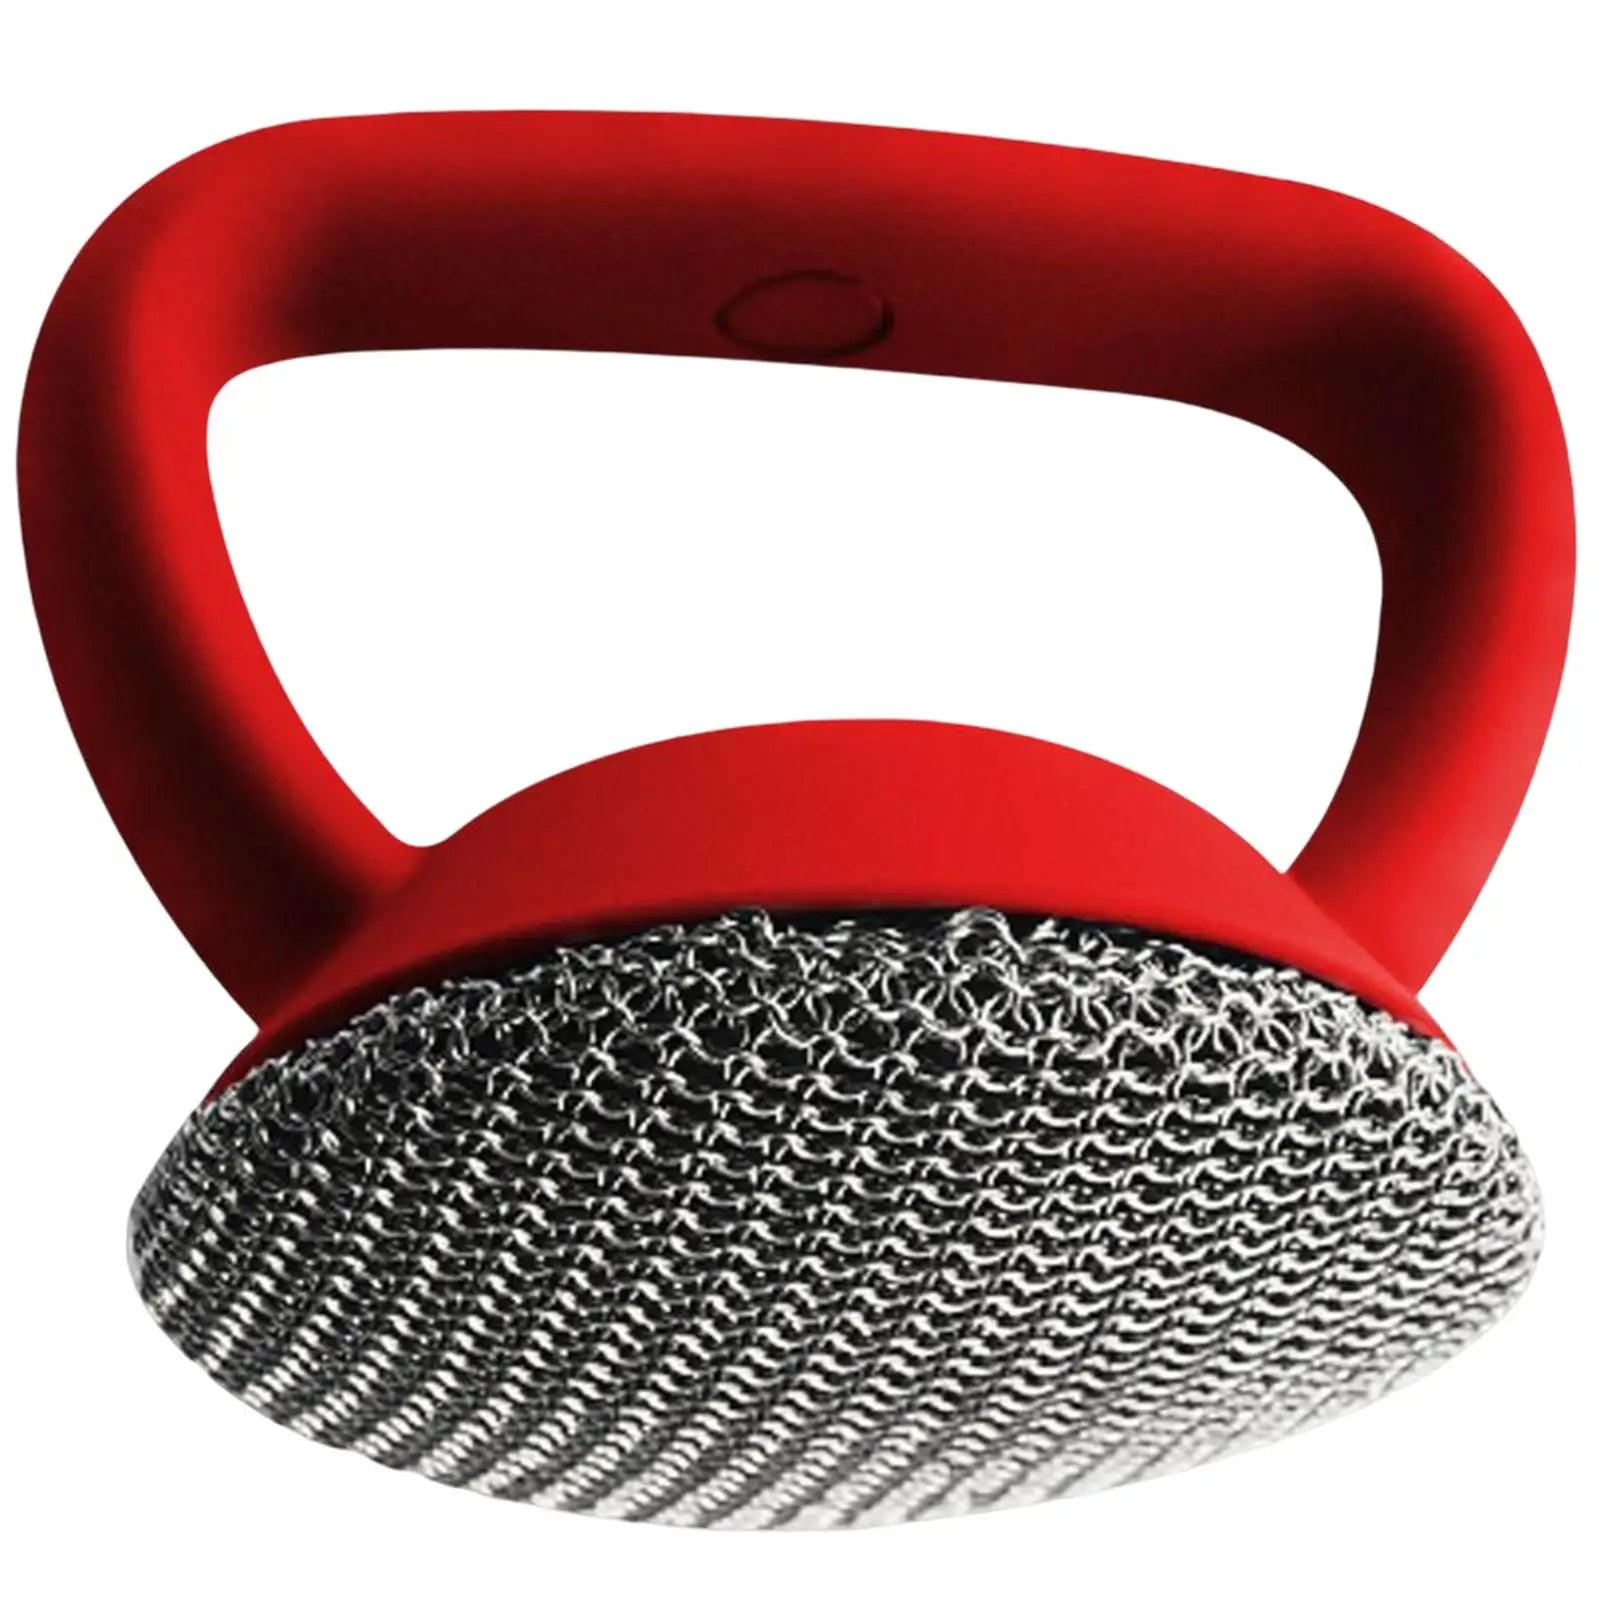 Durable Cookware Cleaning Brush with Handle | Dish Scrubber Tool for Pots, Tableware, and More